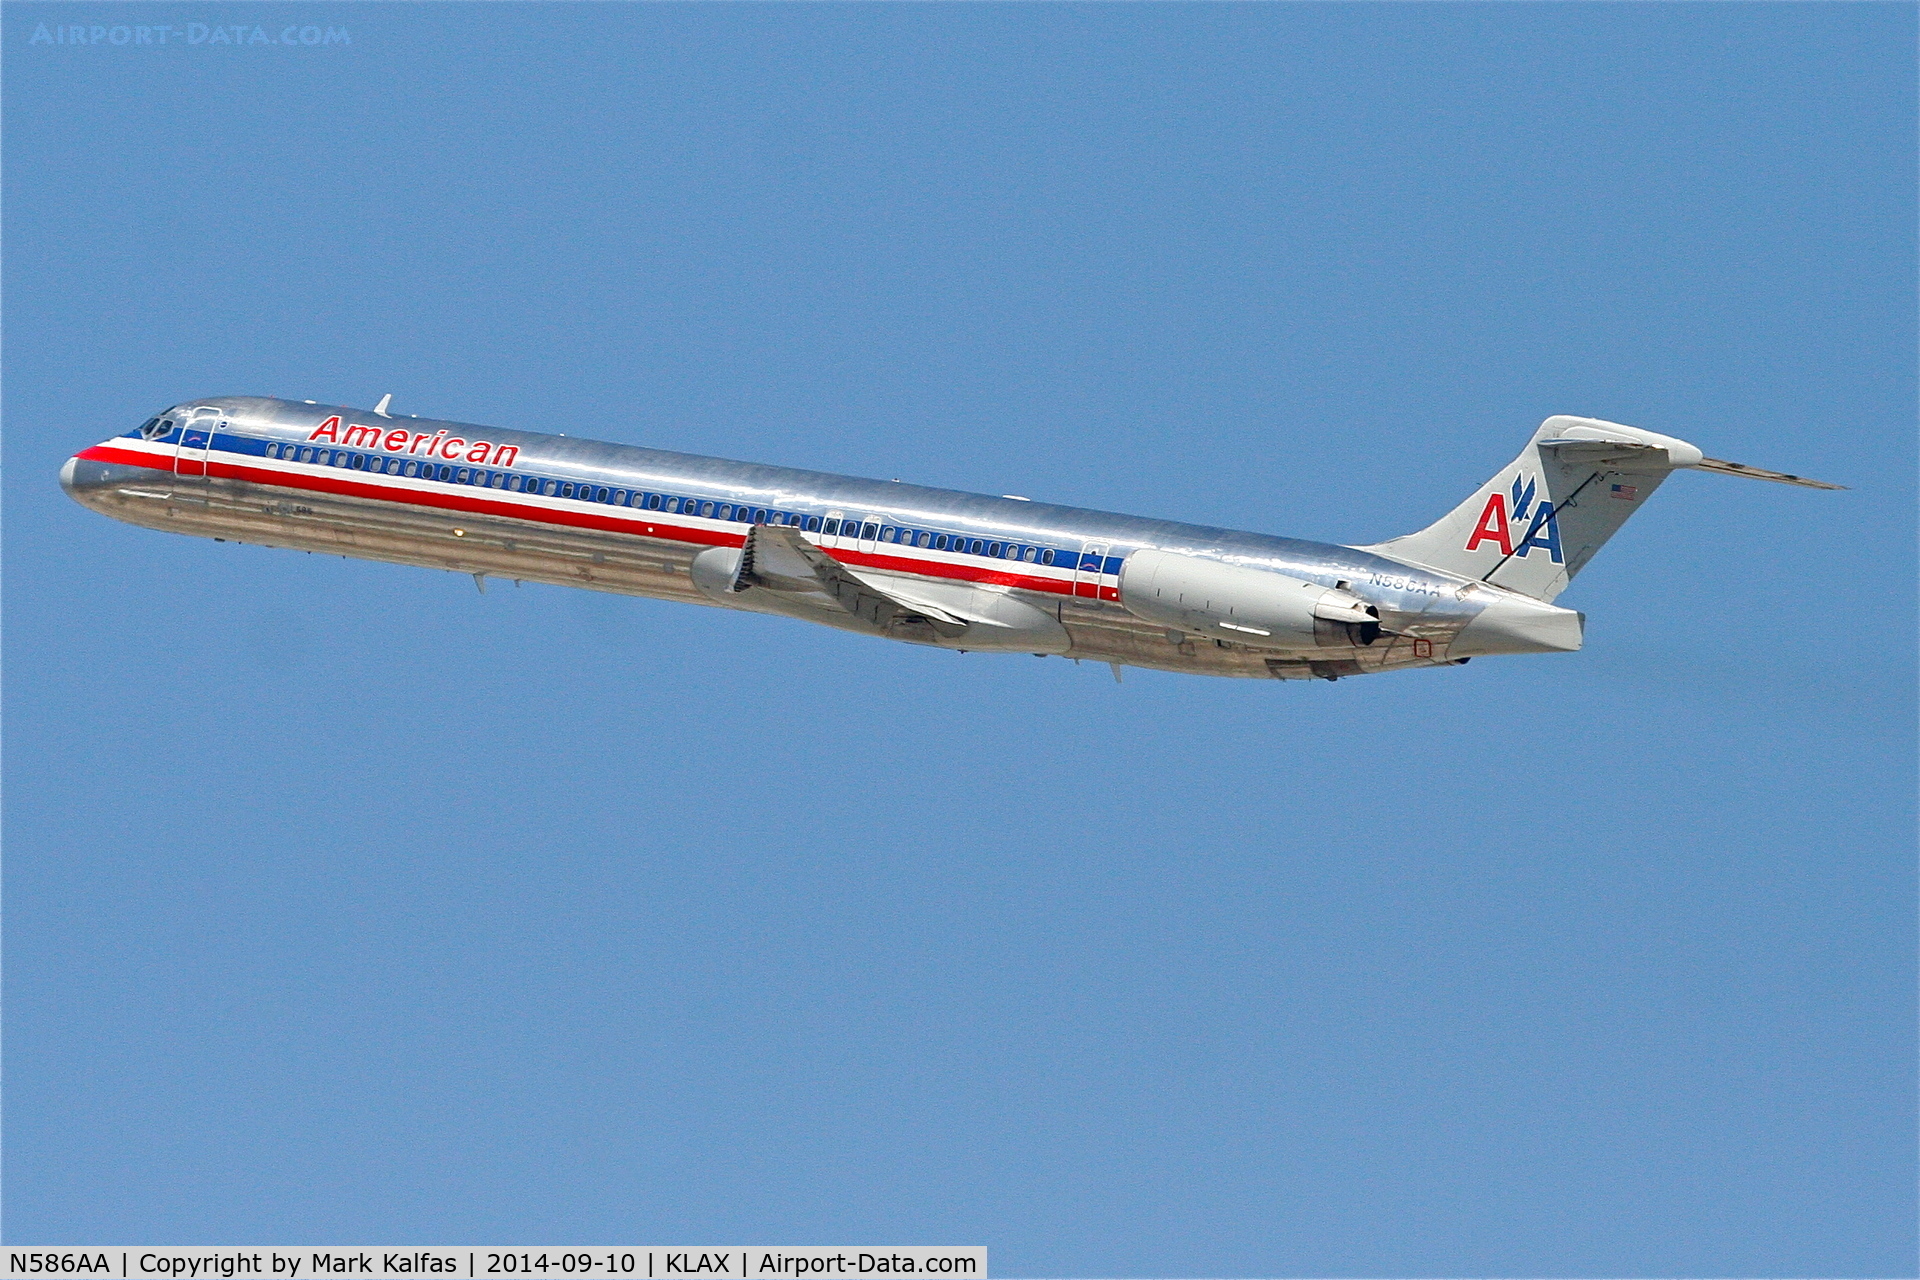 N586AA, 1991 McDonnell Douglas MD-82 (DC-9-82) C/N 53249, Departing 25R LAX. The last revenue flight for N586AA was 2015-12-10 from ORD-DFW.